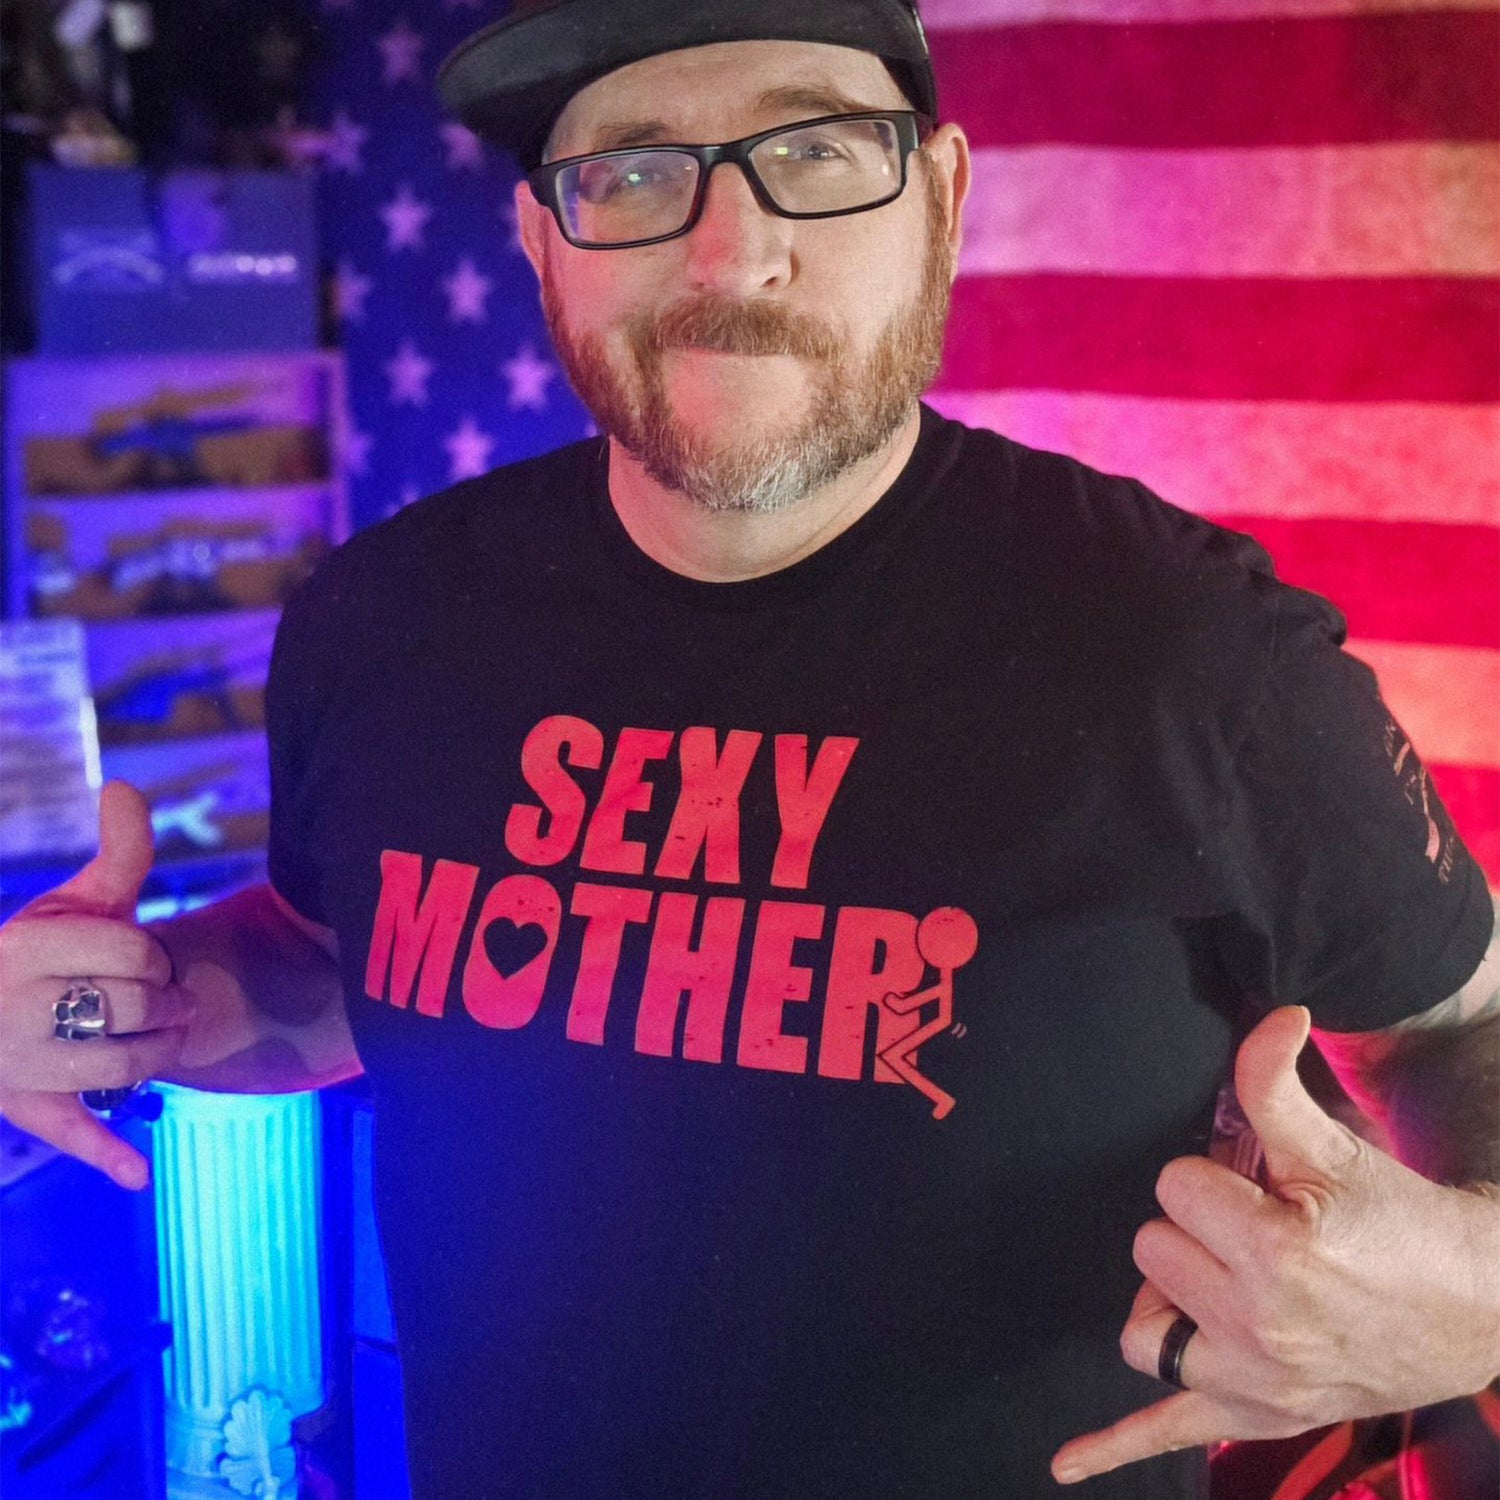 Sexy Motherf*cker Shirt for Men on Valentine's Day 